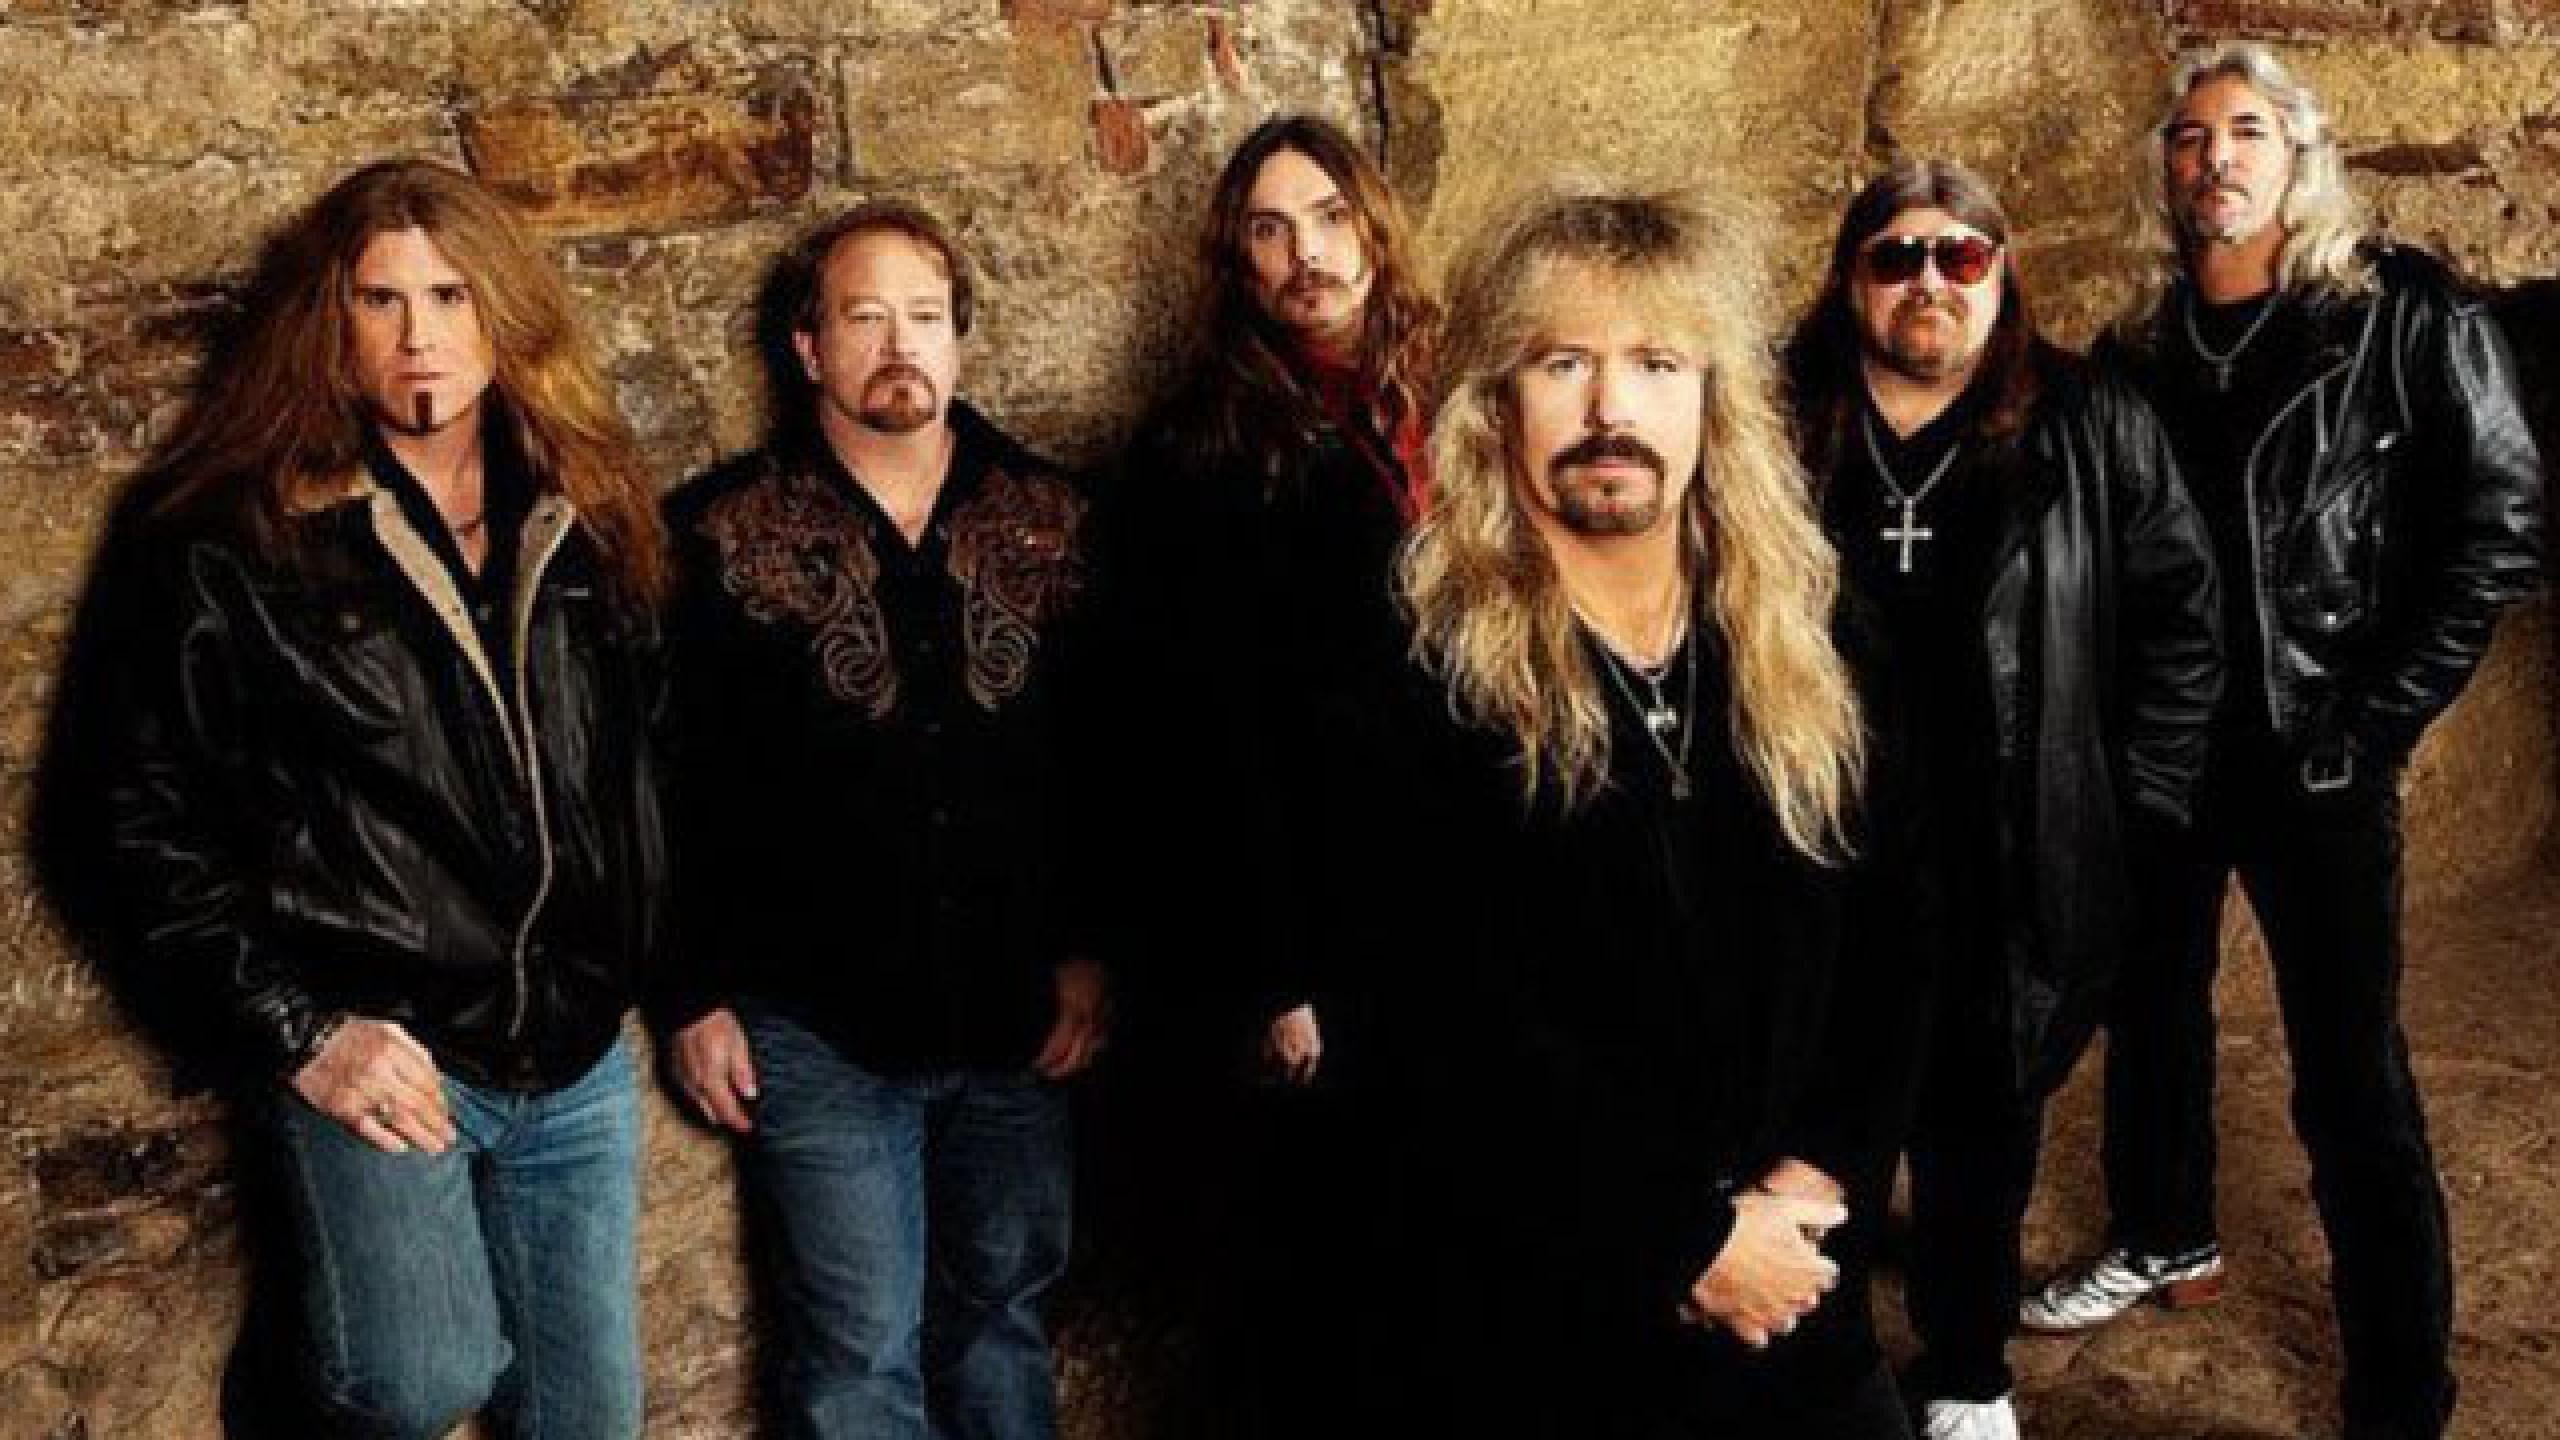 Molly Hatchet tour dates 2022 2023. Molly Hatchet tickets and concerts. Wegow United States